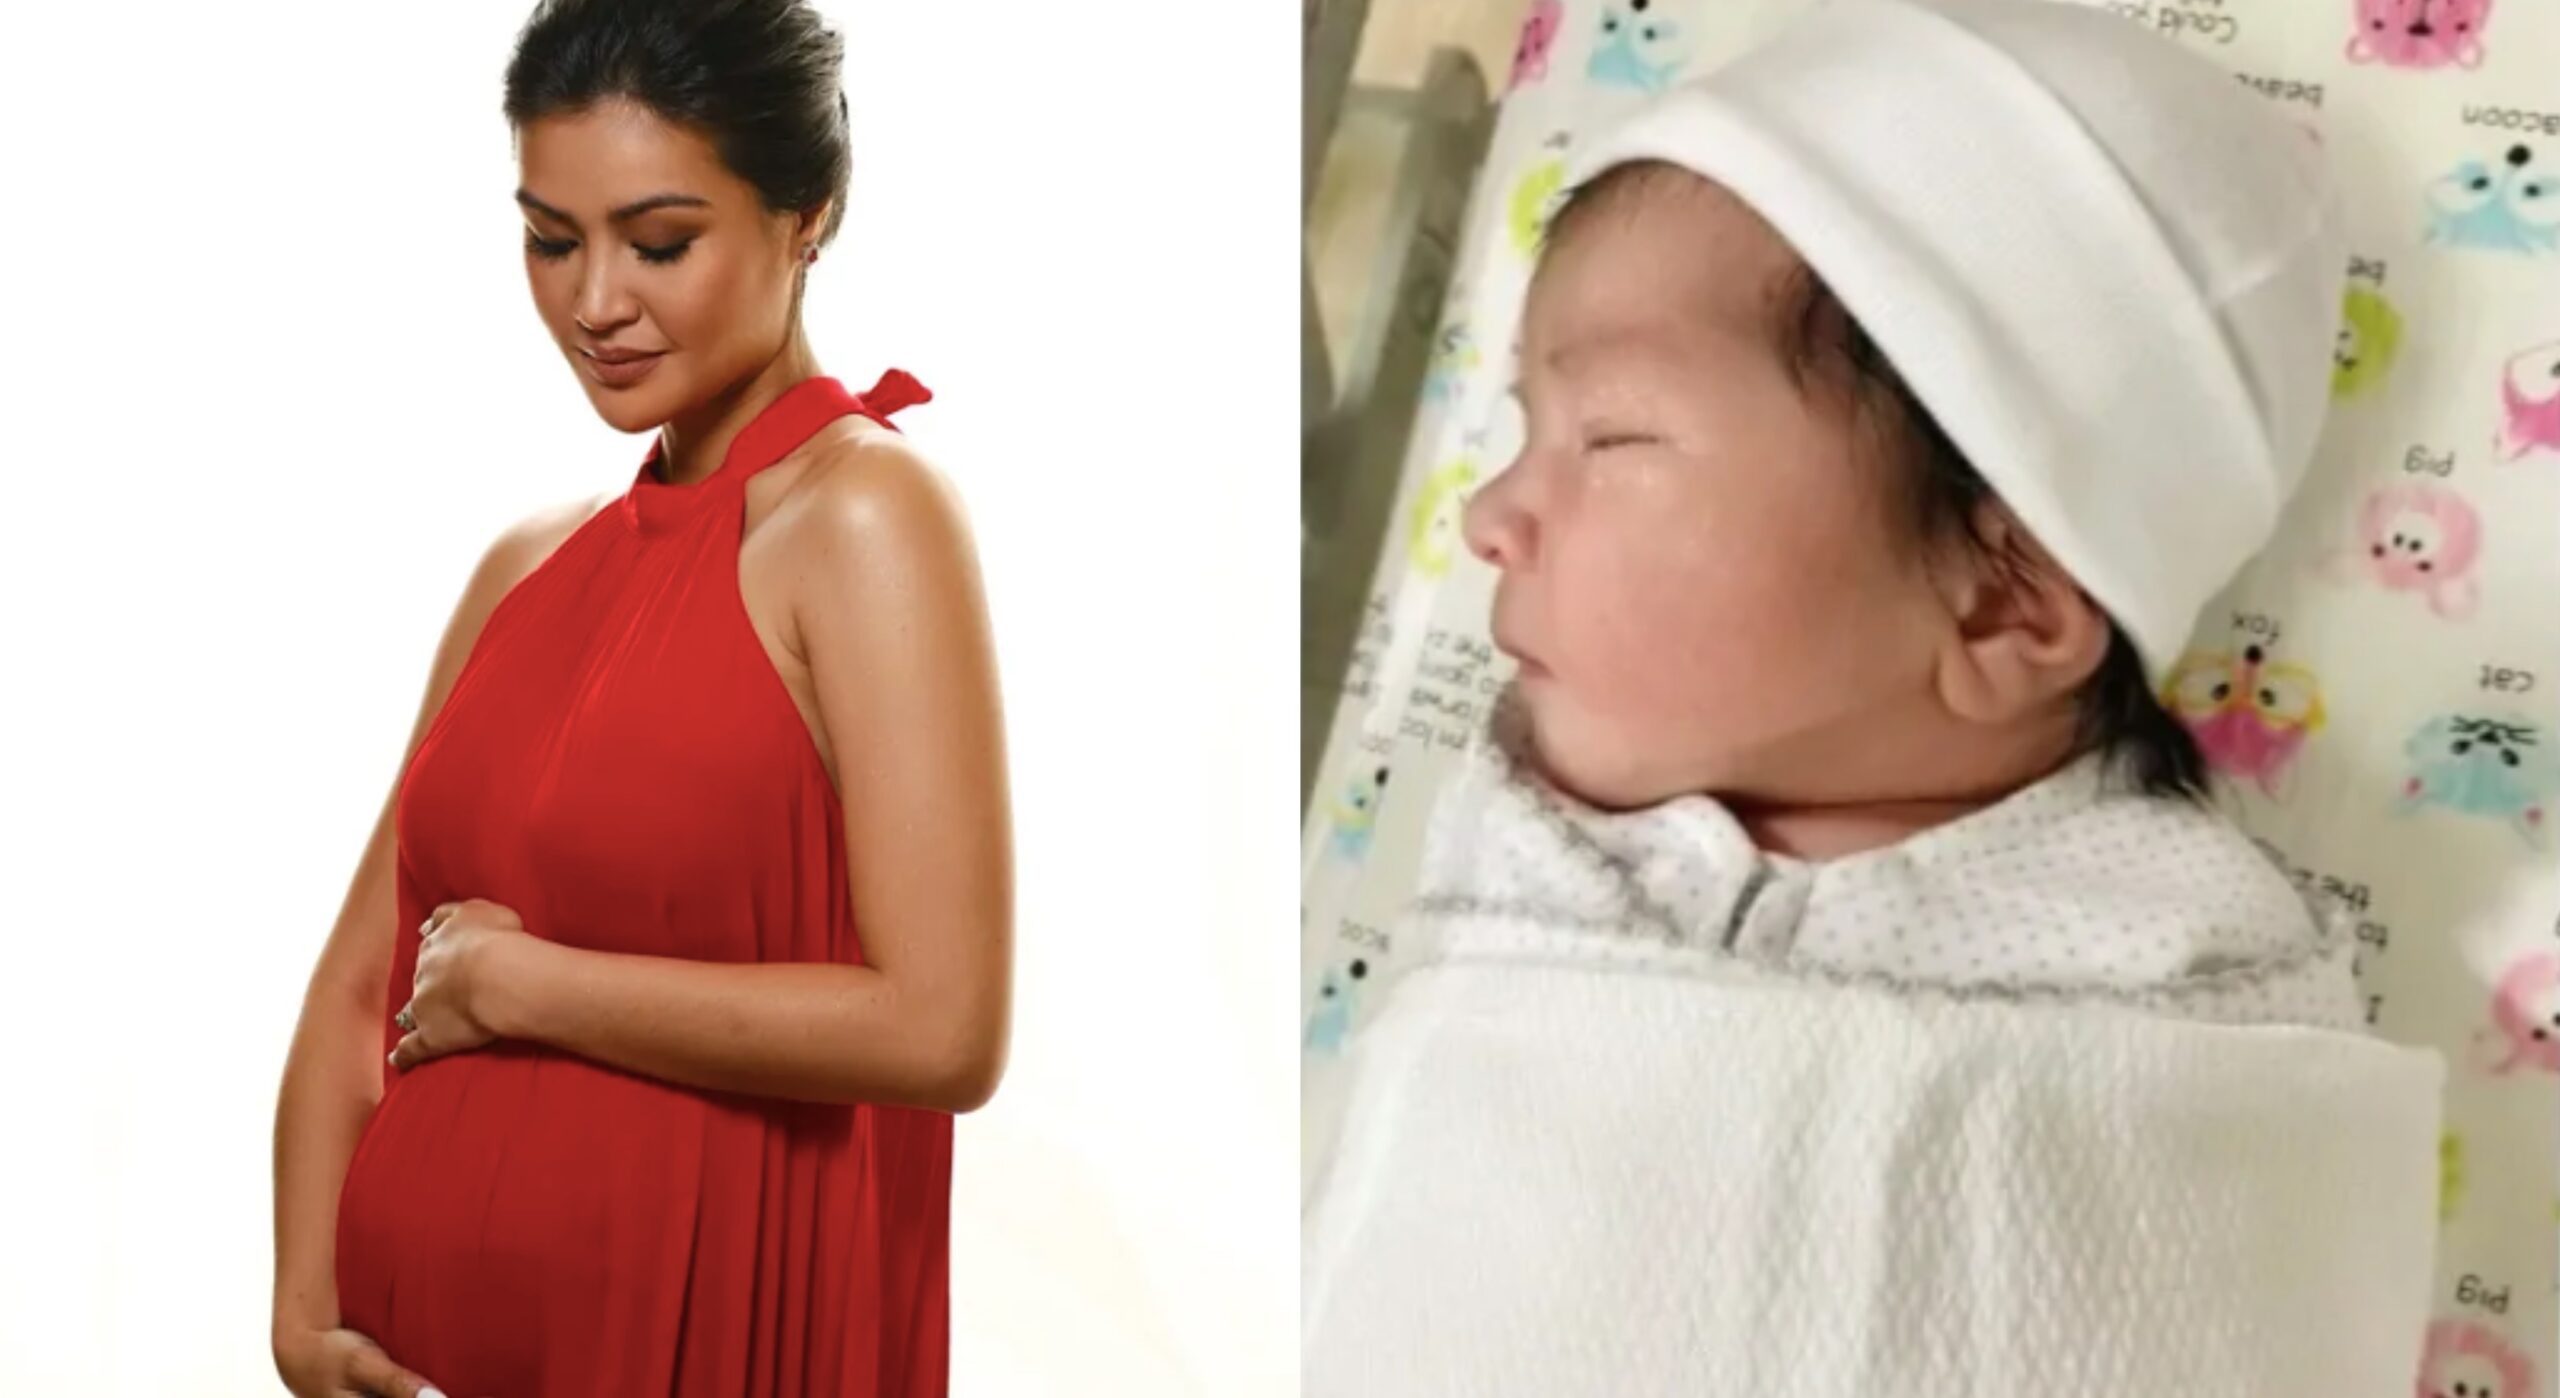 LOOK: Winwyn Marquez gives birth to first child